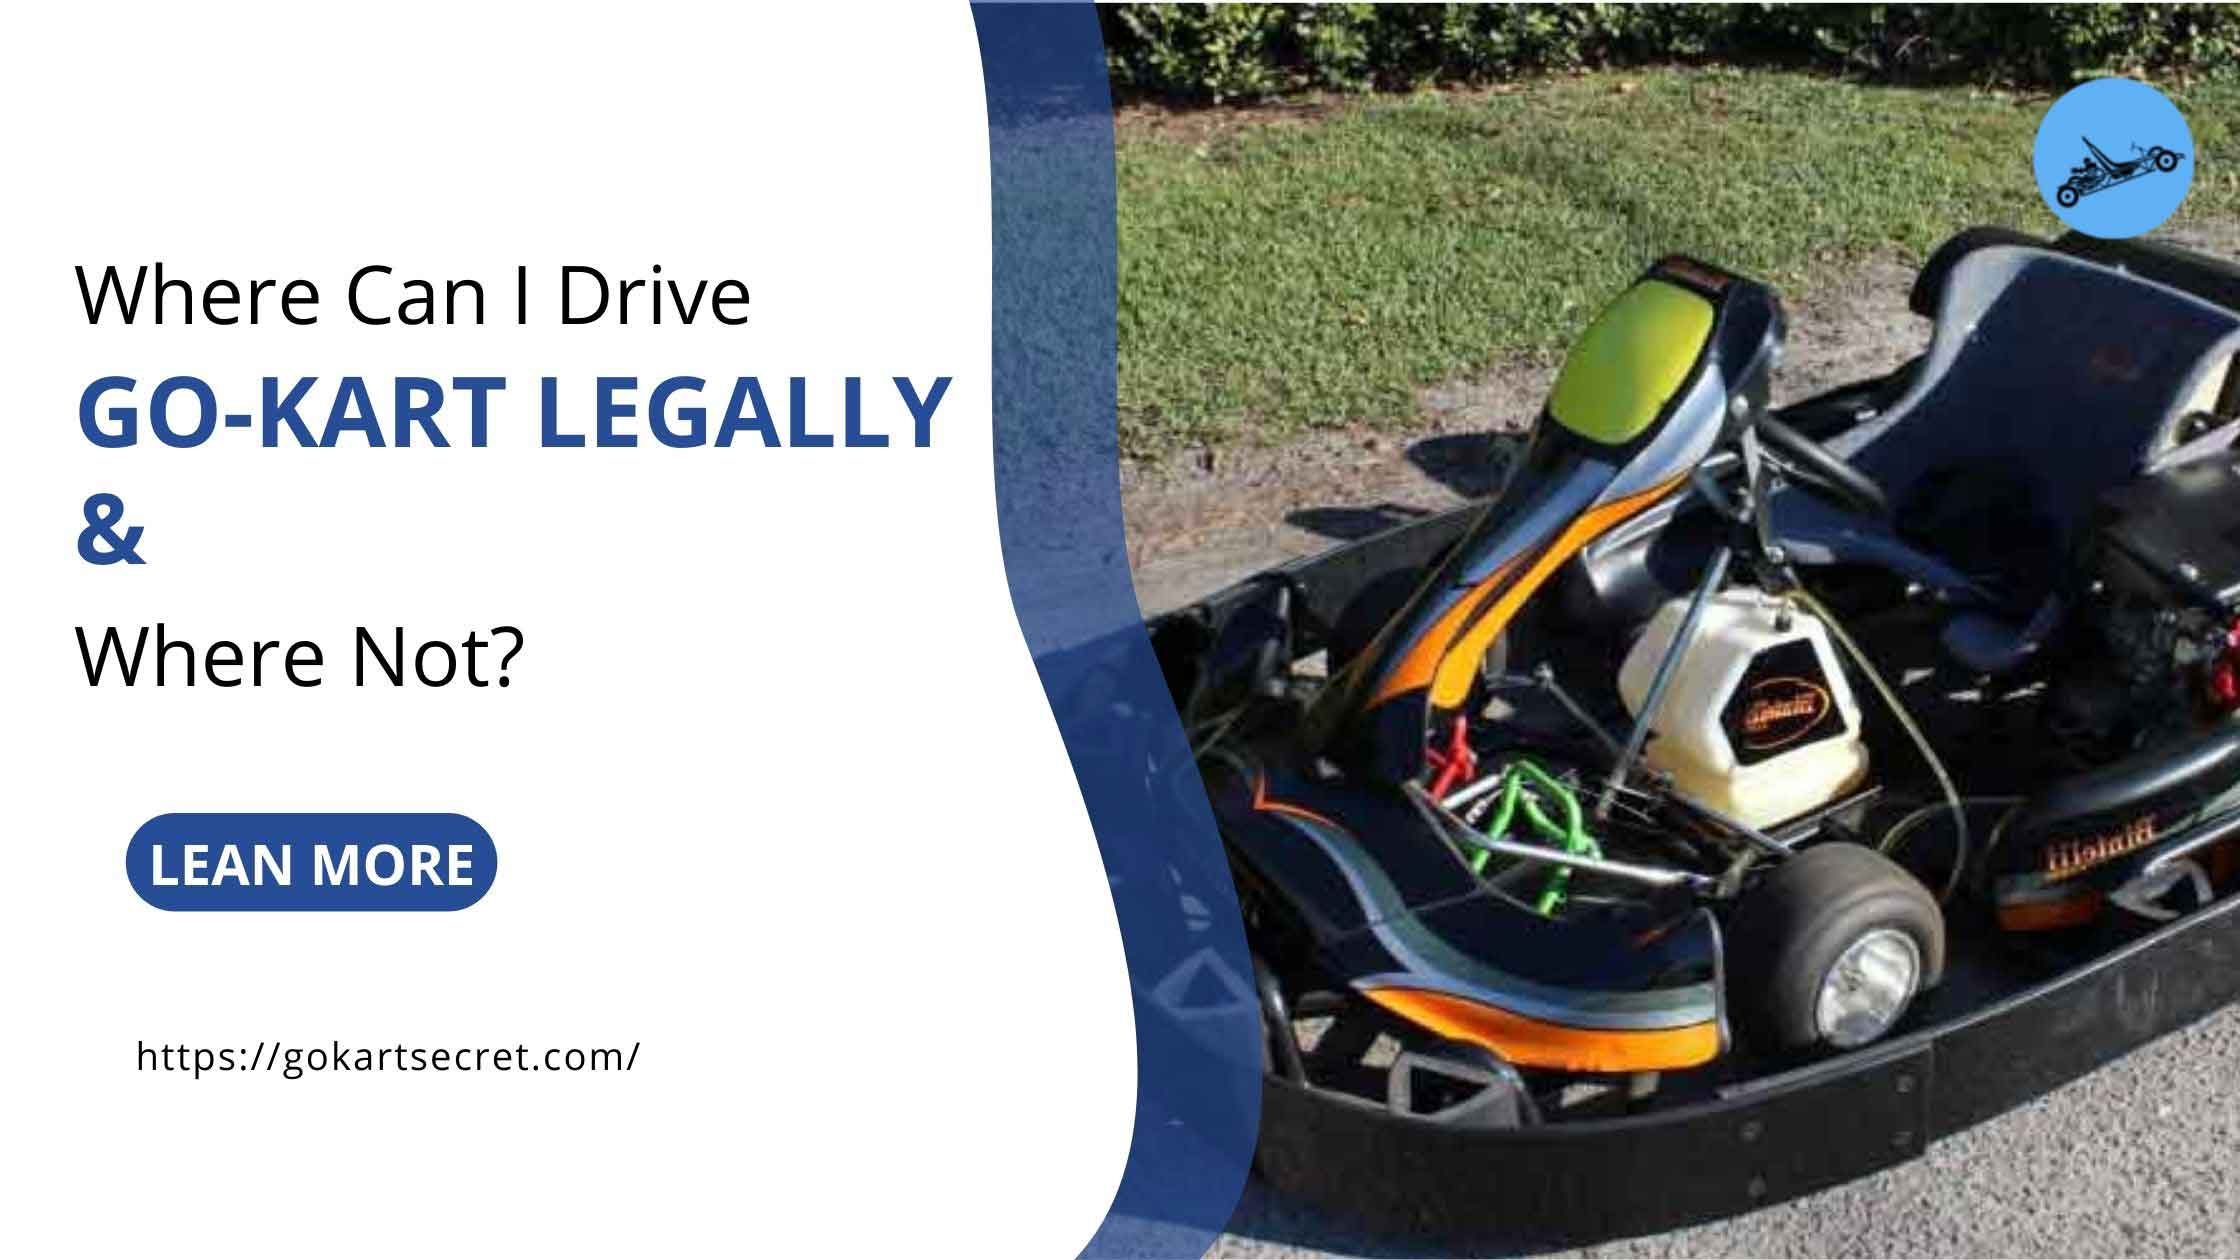 Where Can I Drive My Go-Kart Legally & Where Not?